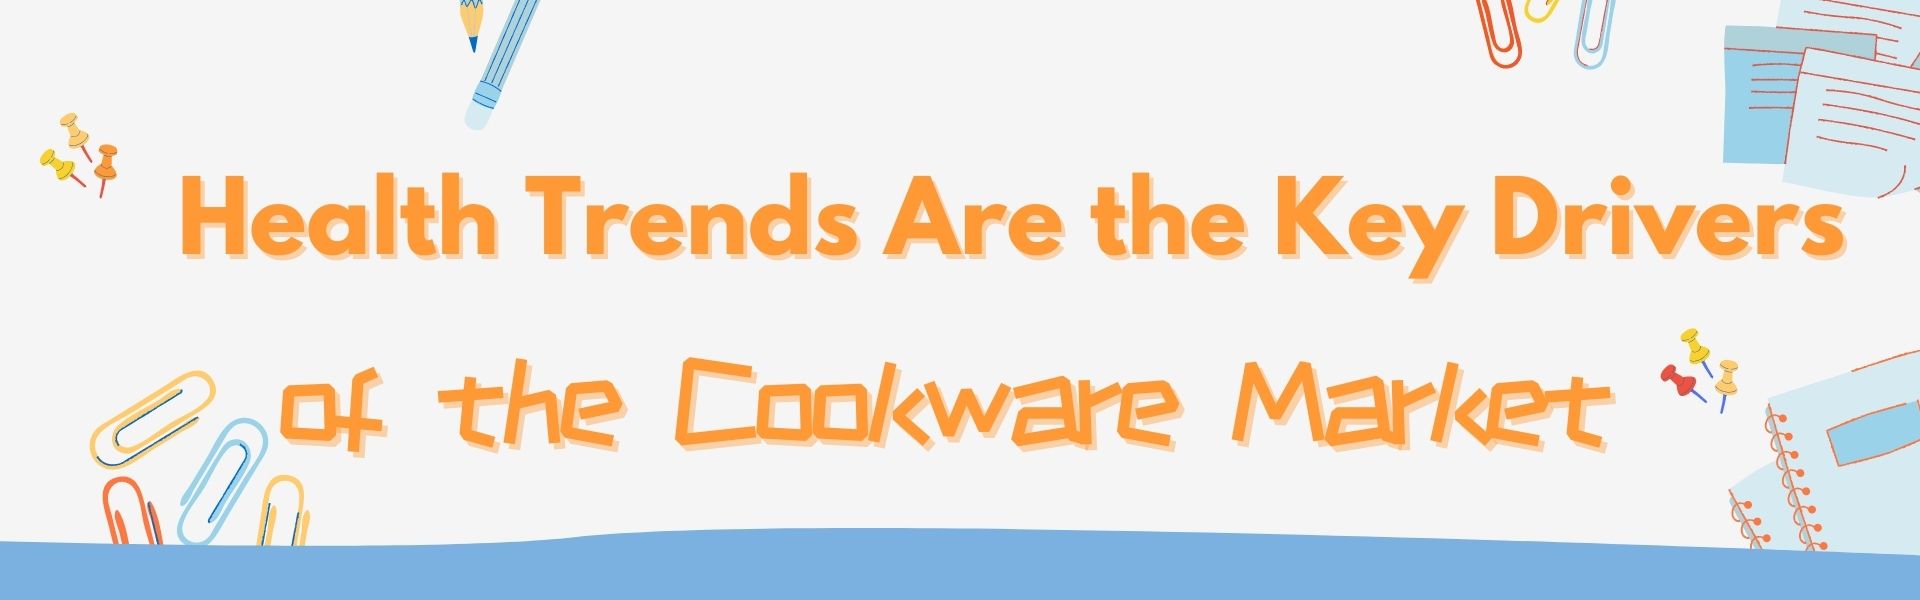 Health Trends Are the Key Drivers of the Cookware Market